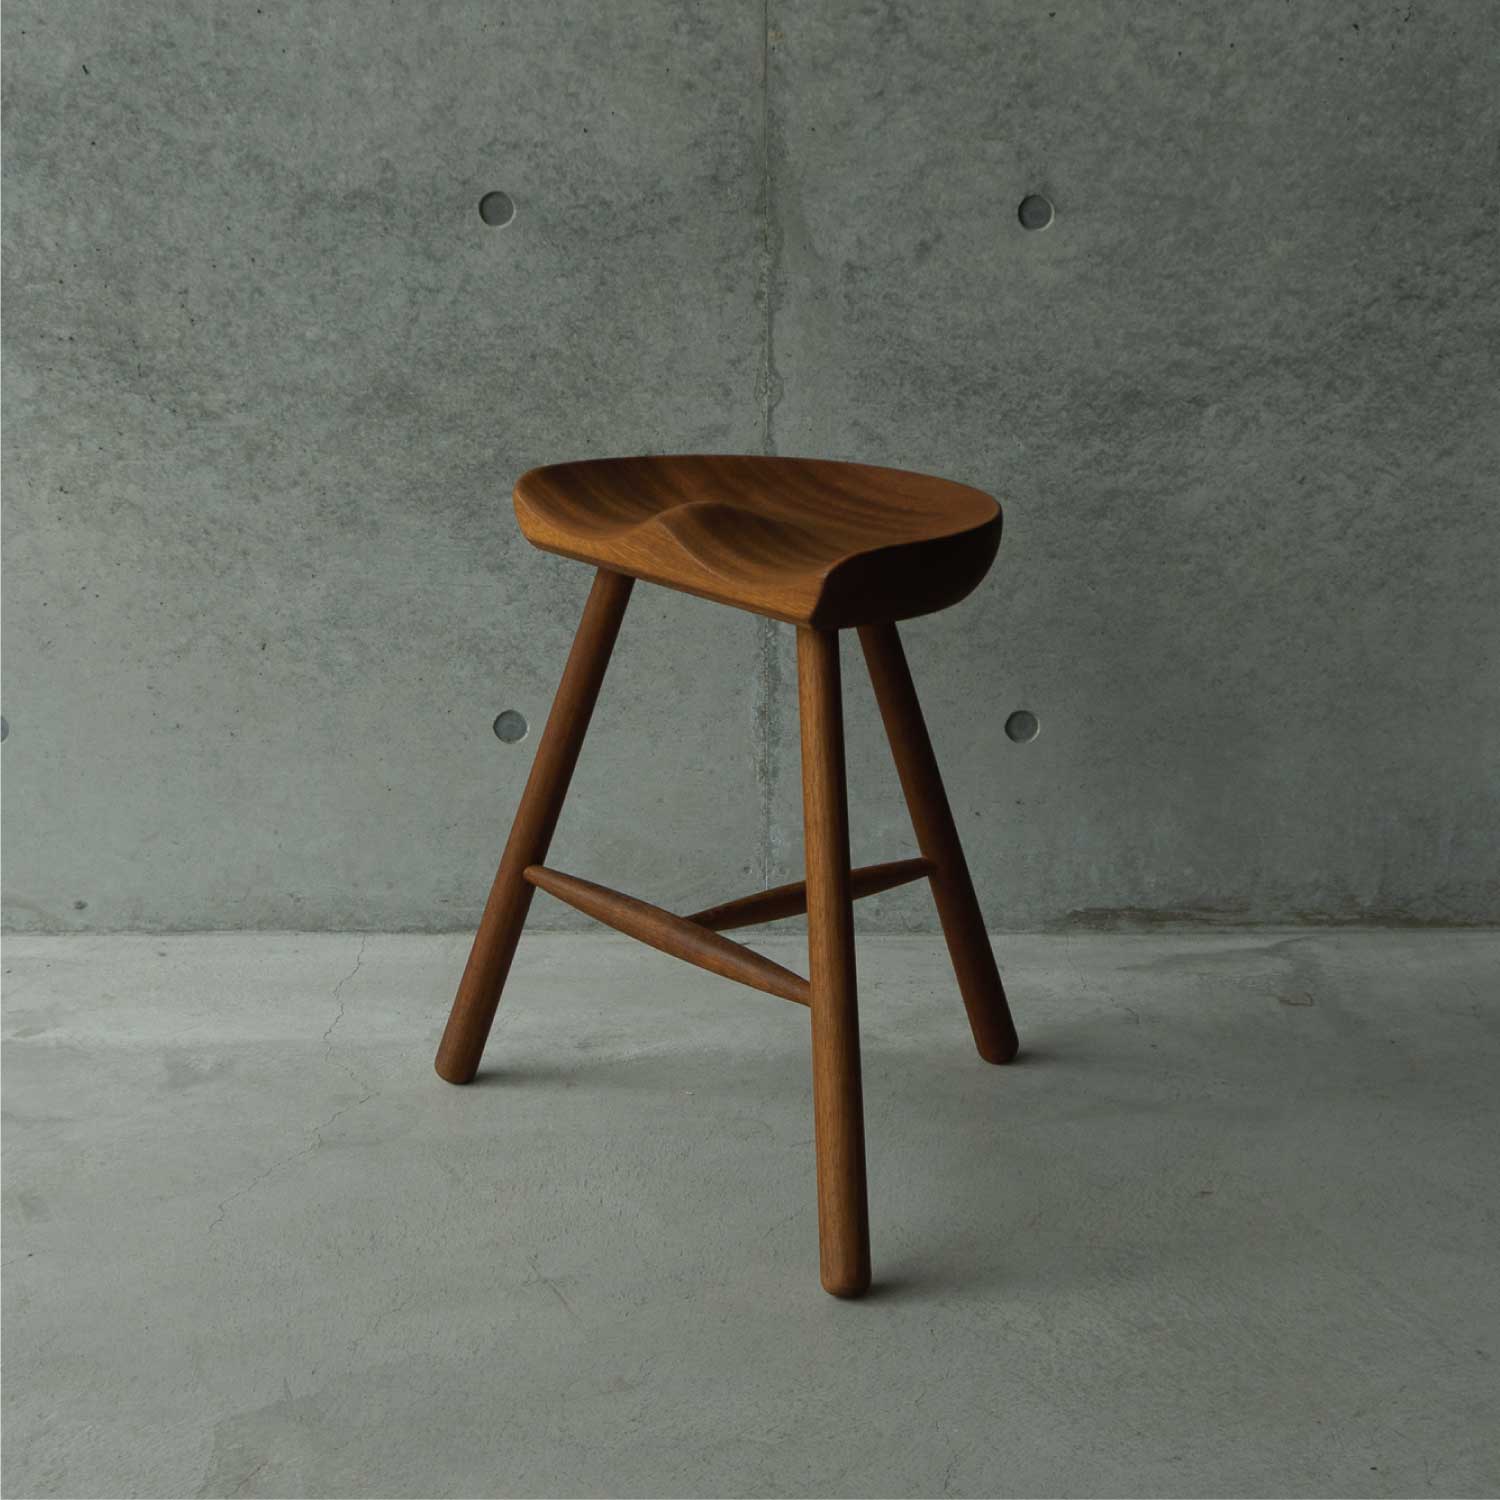 Y's DAY Online Shop / SHOEMAKER CHAIR | イロコウッド